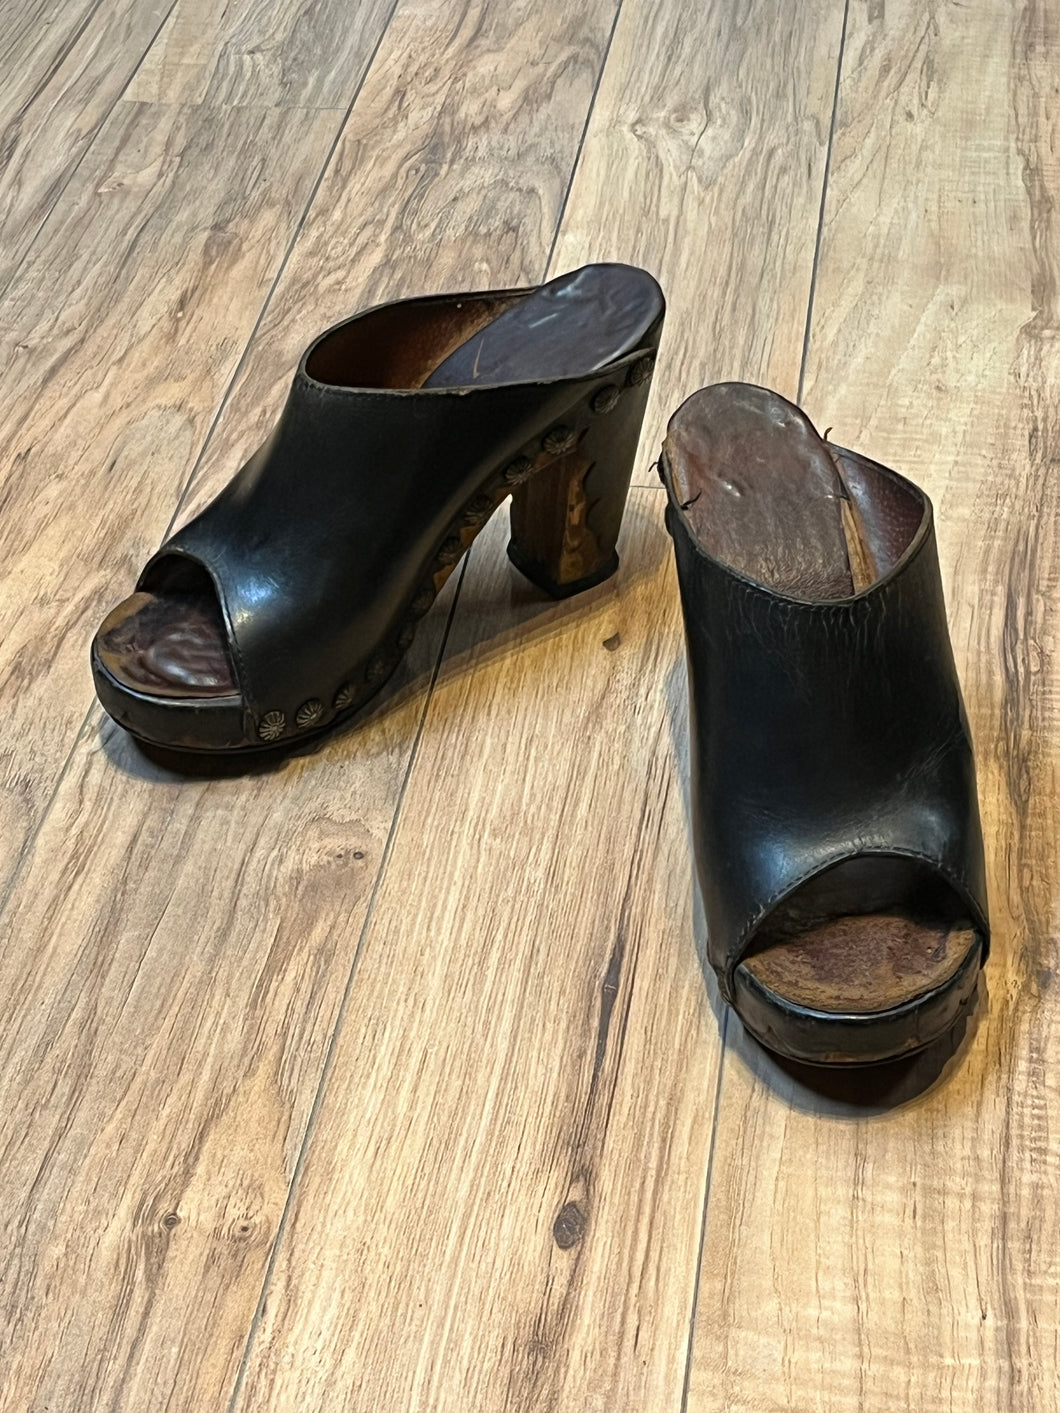 Vintage 1960s Black Tacked Clogs with Wooden Heel, Size US Womens 7, EUR 38 SOLD